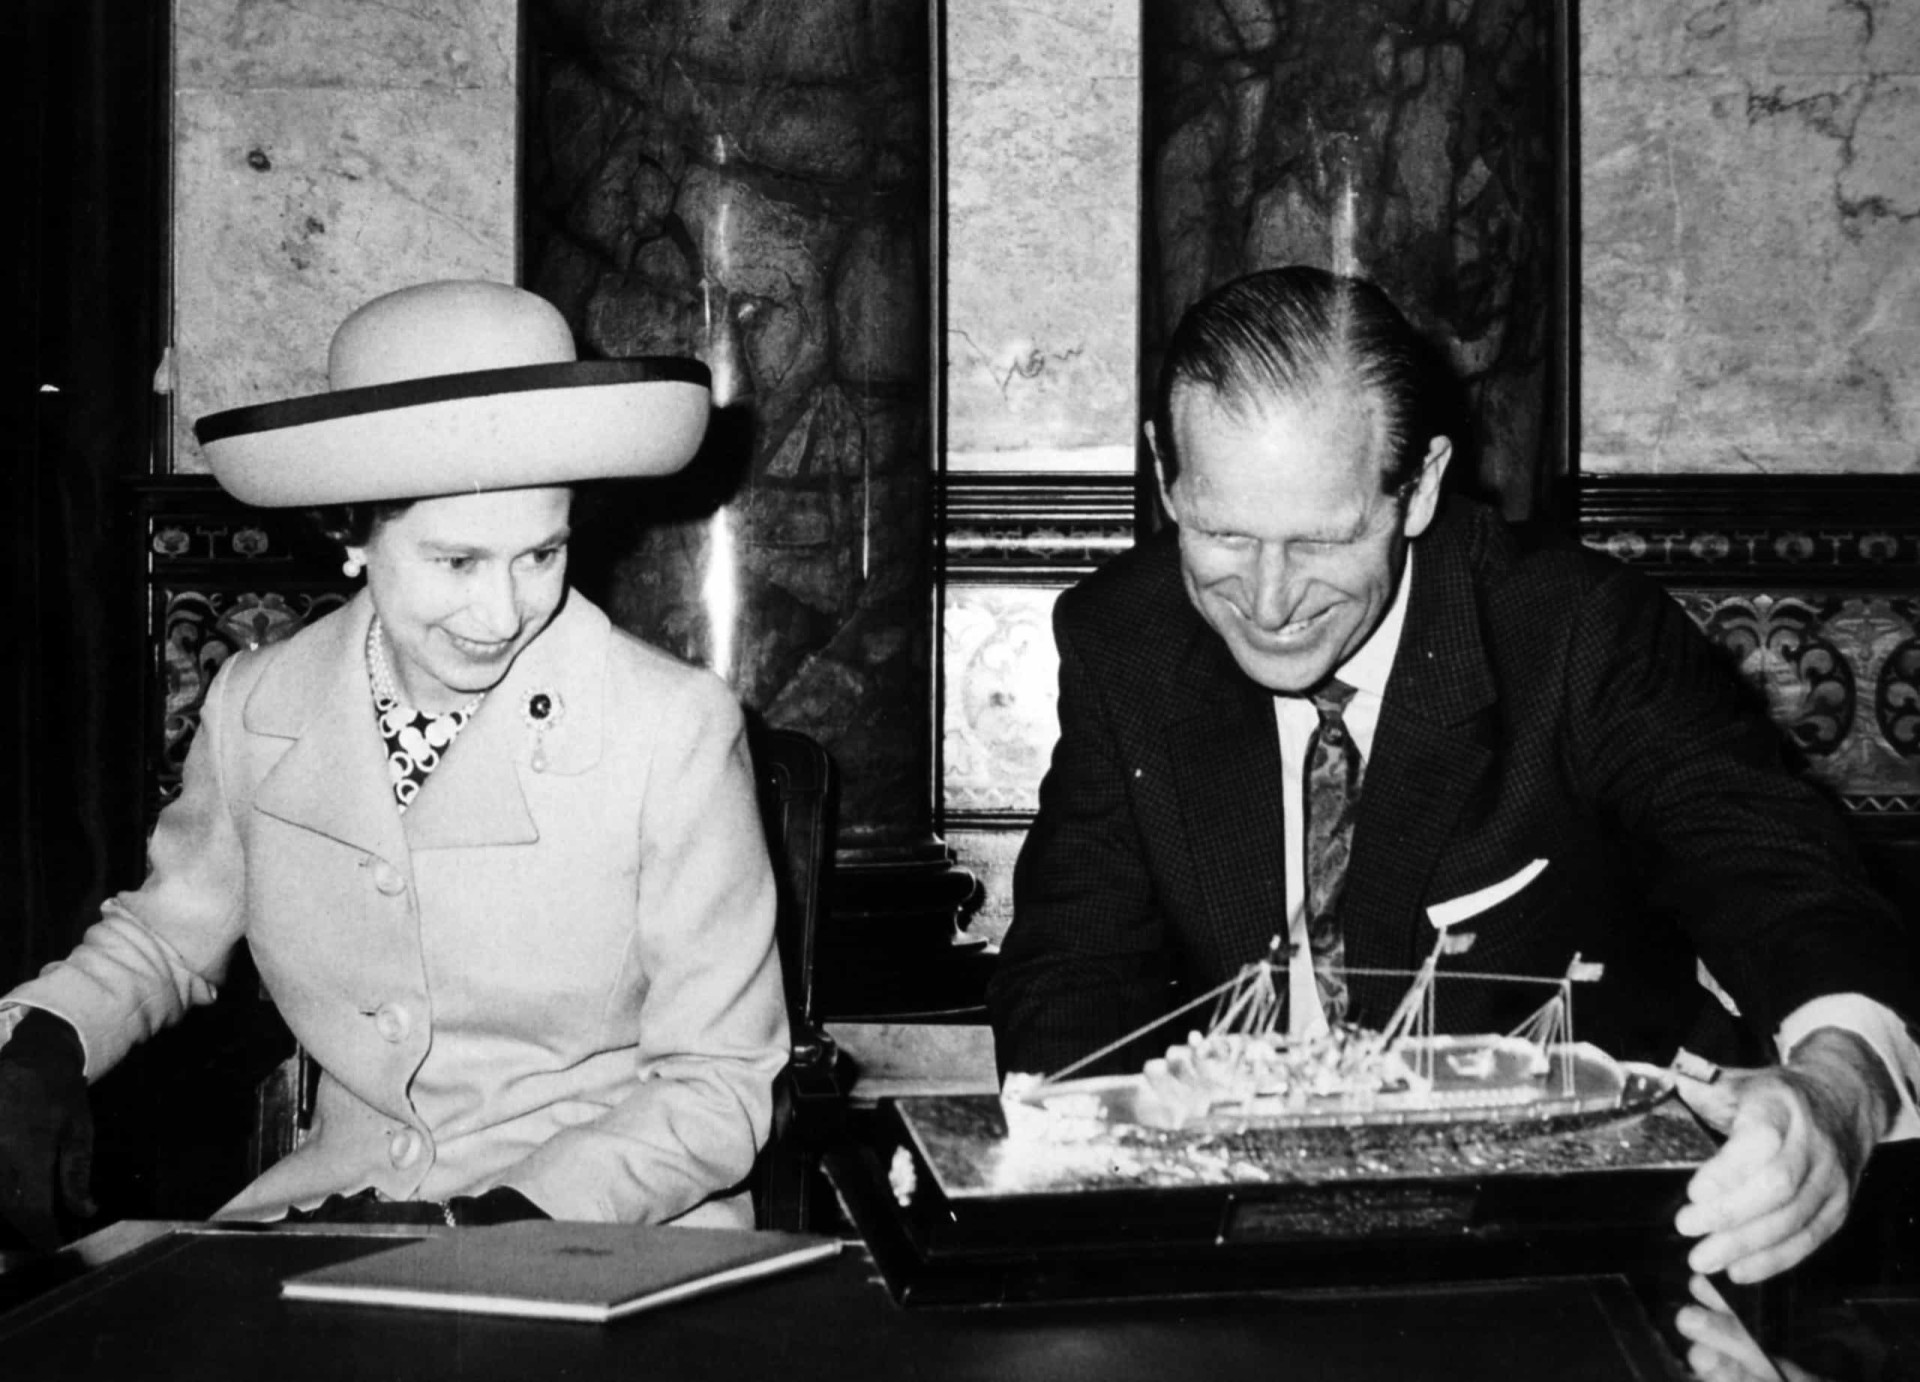 <p>Queen Elizabeth II and the Duke of Edinburgh admire a gift received after the monarch opened the new accommodation of Lloyd's Register of Shipping at the society's City of London headquarters. The gift was a silver model replica of the Royal Yacht <em>Britannia</em>.</p><p>You may also like:<a href="https://www.starsinsider.com/n/339710?utm_source=msn.com&utm_medium=display&utm_campaign=referral_description&utm_content=474709v3en-us"> Bugshots: insects as you've never seen them before!</a></p>